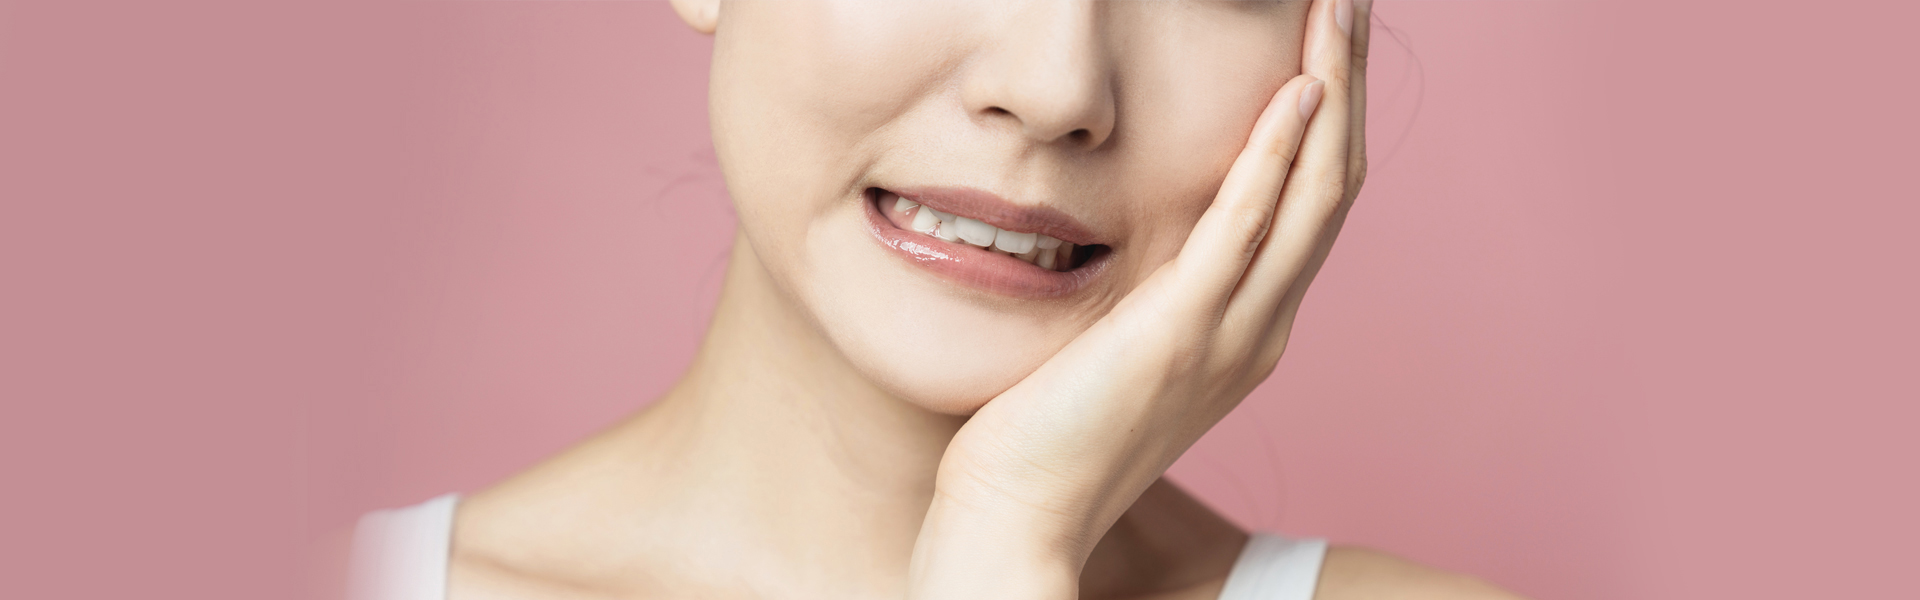 Why do Dentists recommend teeth Extractions?